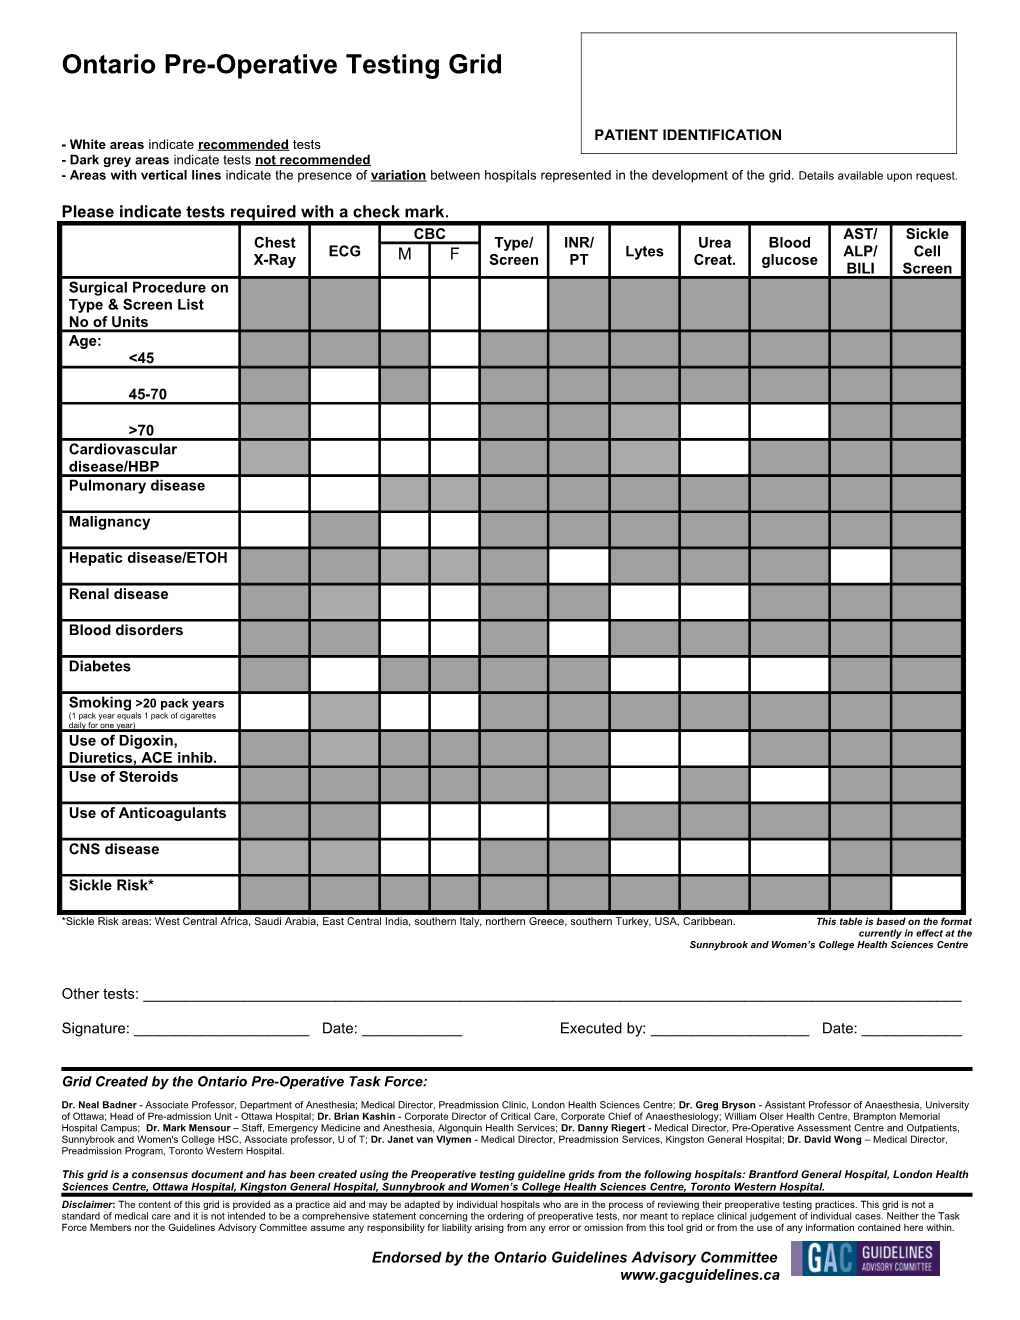 Pre-Operative Testing Grid Based on Clinical Practice Guidelines Adopted at Sunnybrook